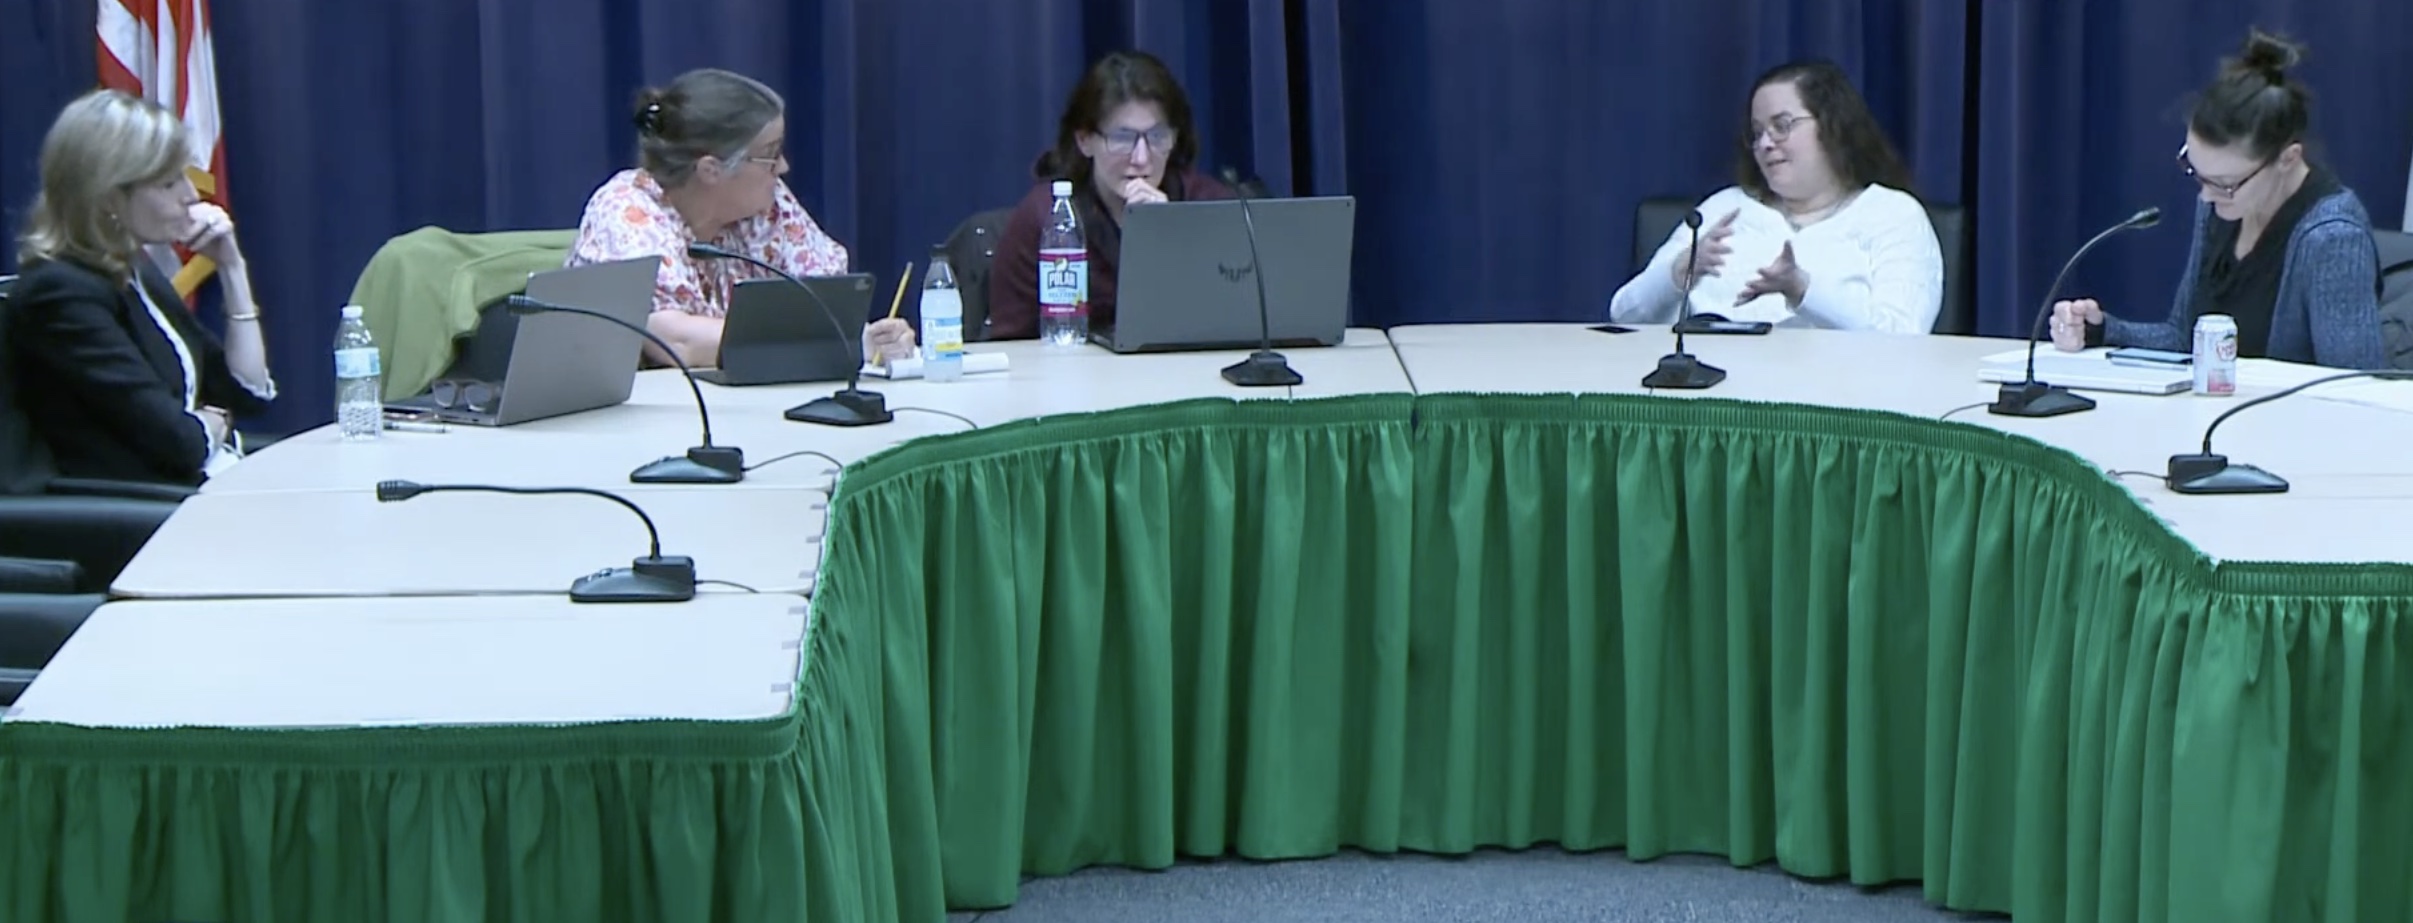 School Committee gives superintendent mostly ‘exemplary’ ratings